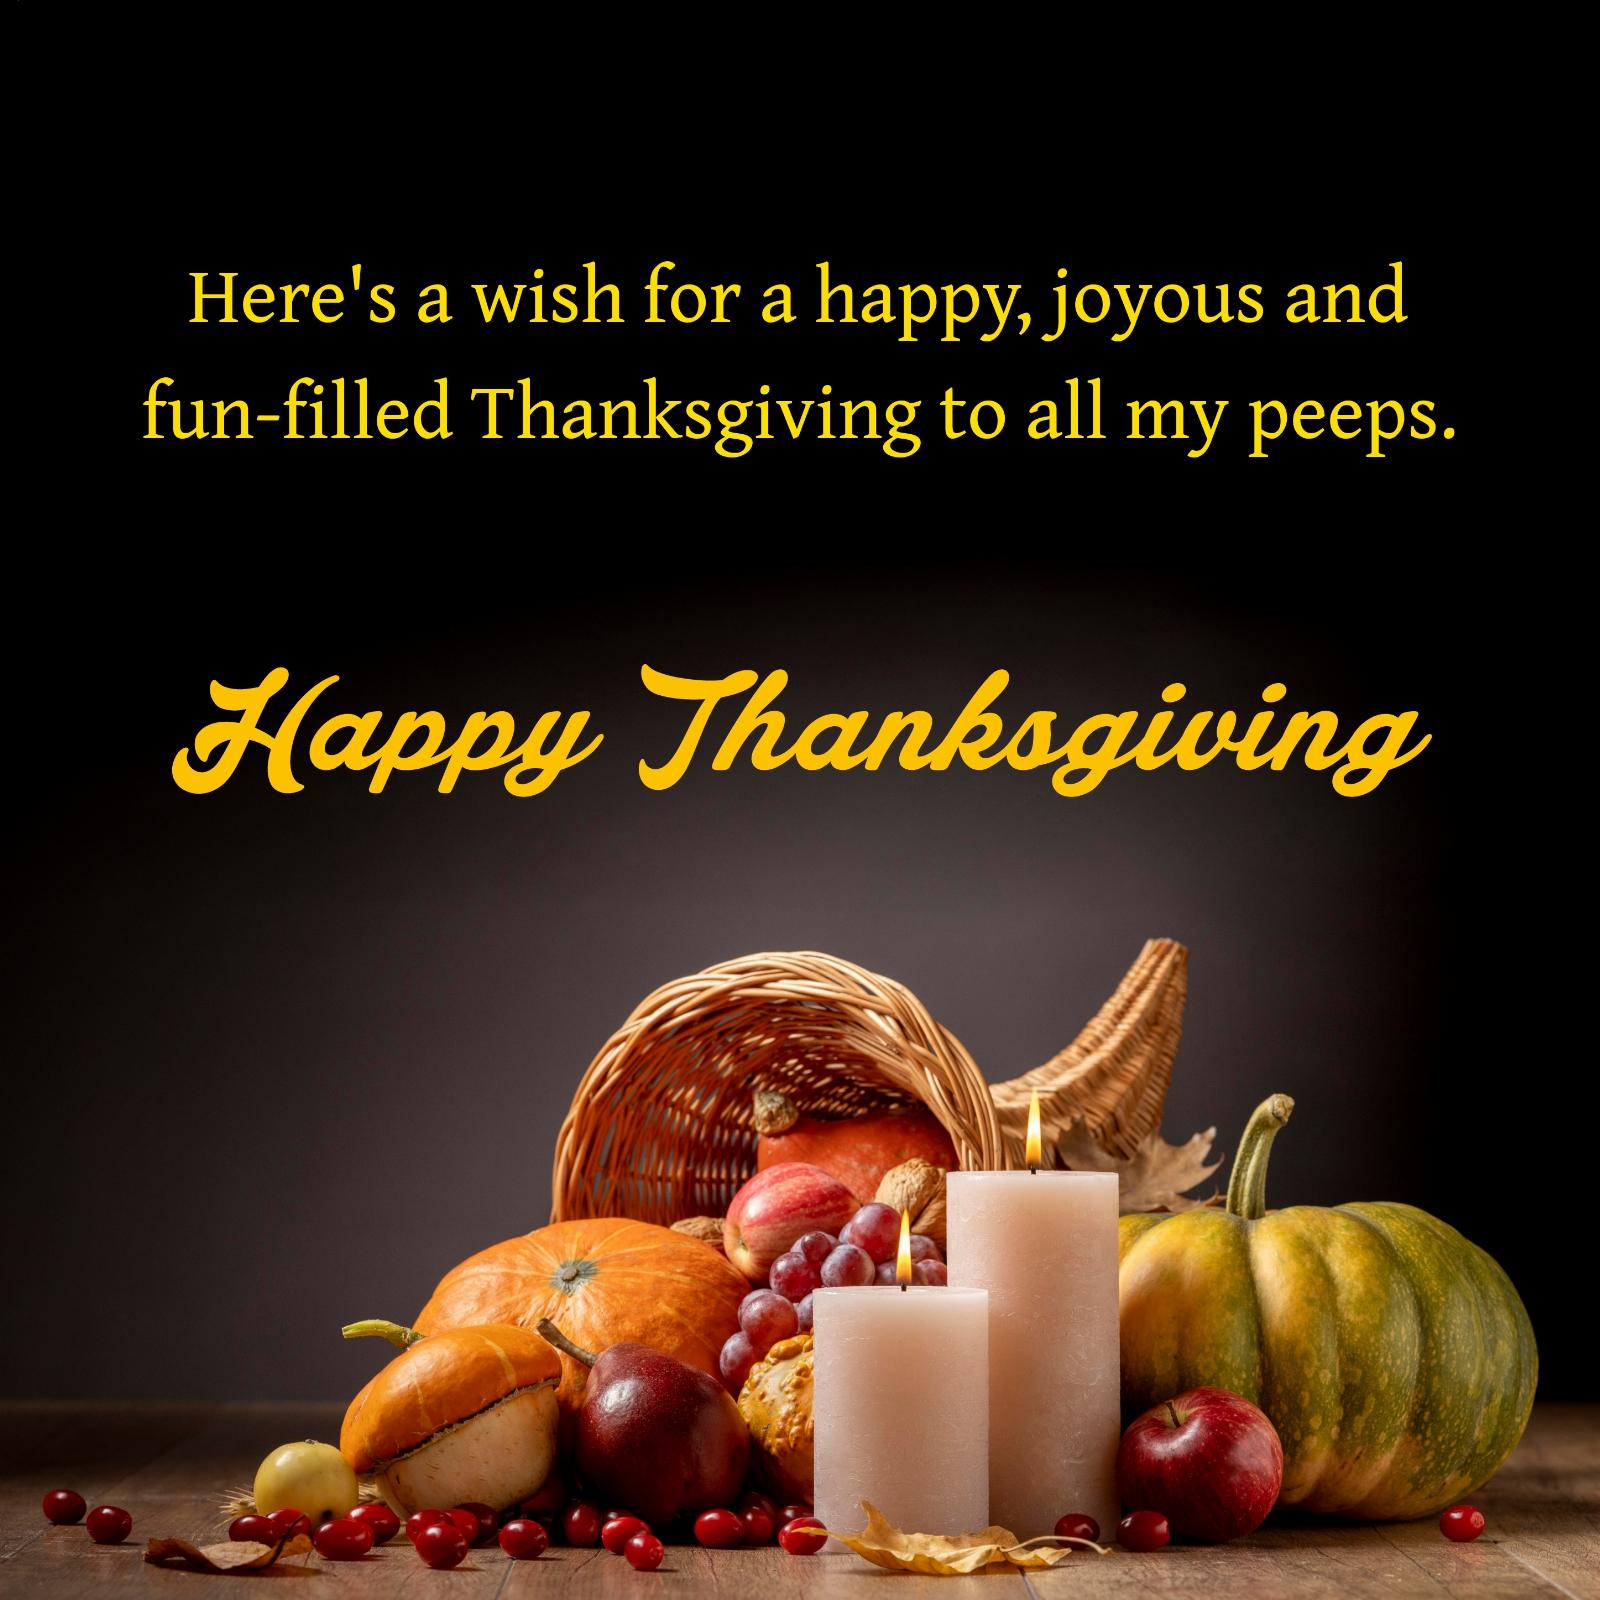 Here's a wish for a happy joyous and fun-filled Thanksgiving to all my peeps